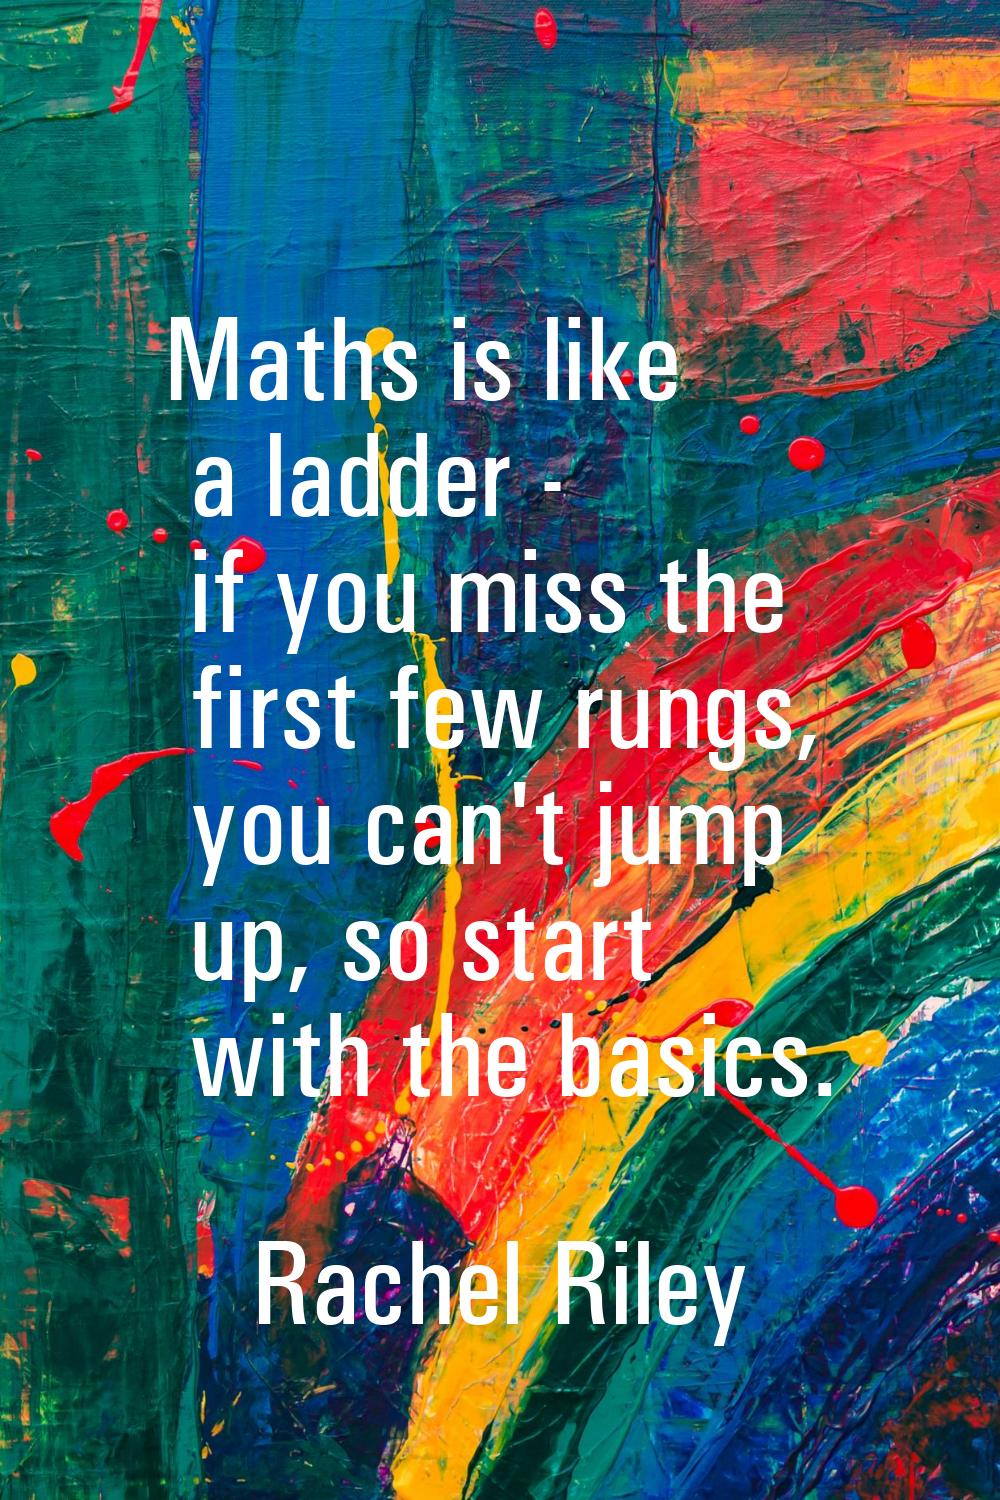 Maths is like a ladder - if you miss the first few rungs, you can't jump up, so start with the basi